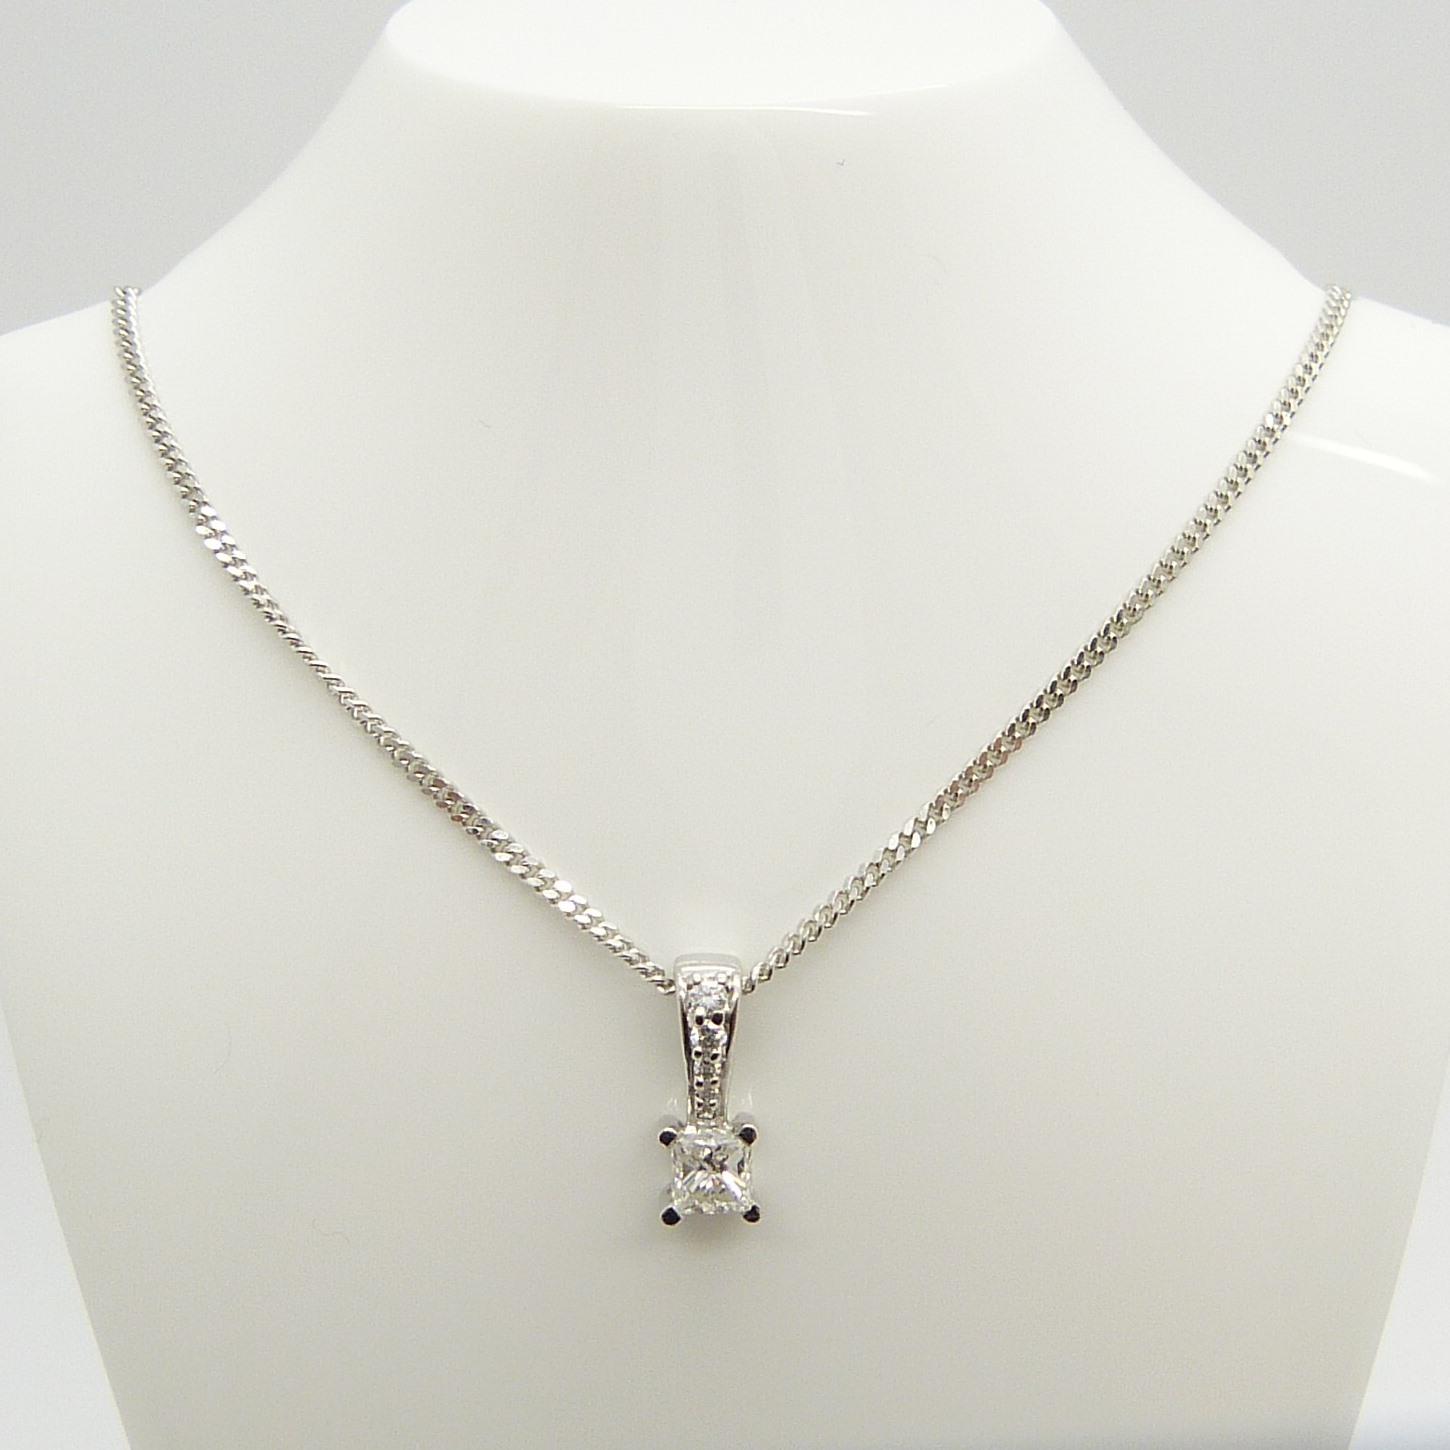 A pre-owned 0.30 carat princess-cut solitaire diamond pendant and chain, boxed - Image 4 of 9